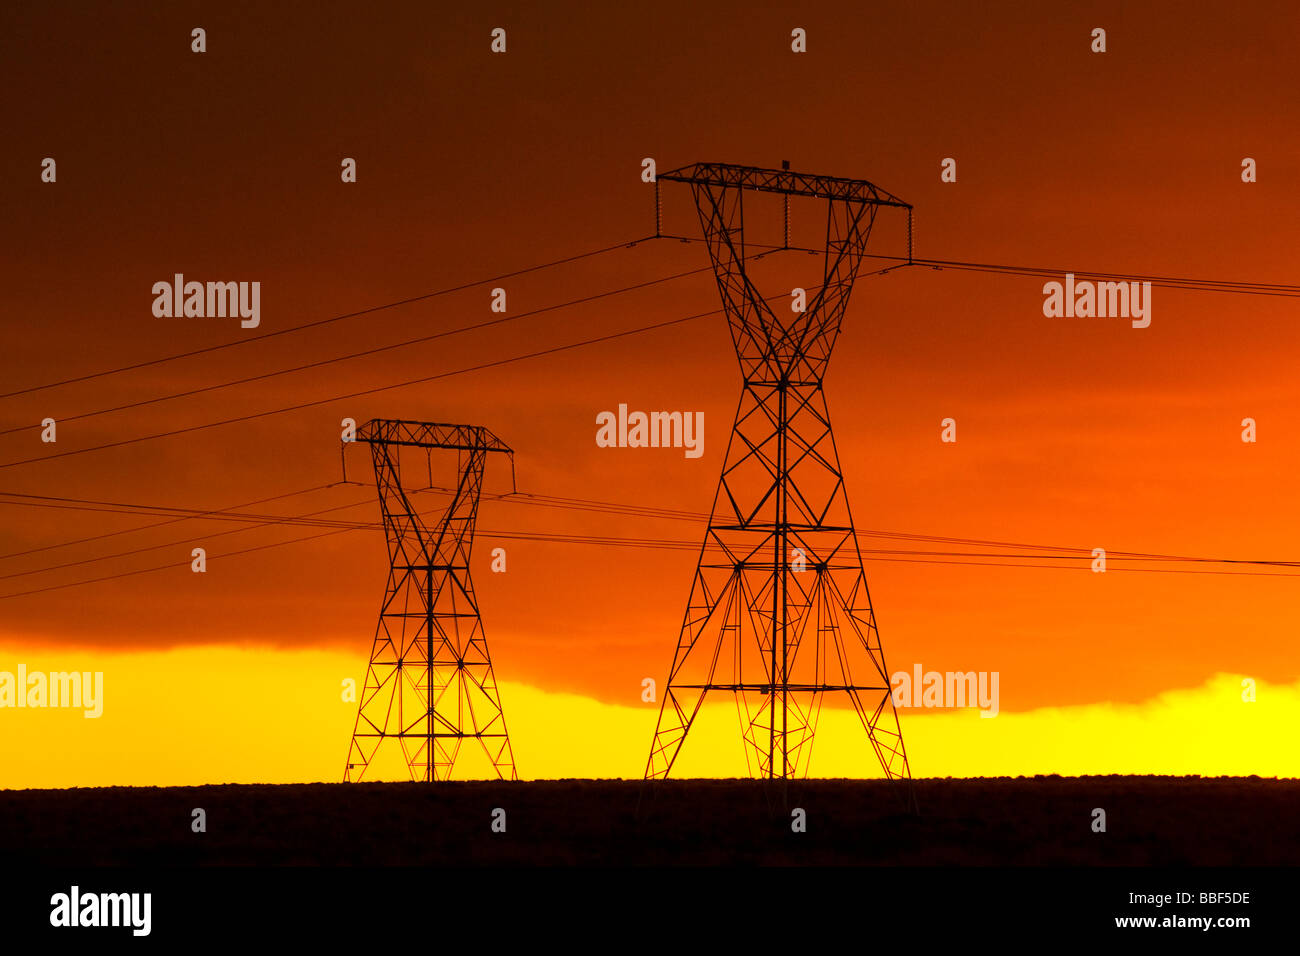 New Zealand, North Island, Central Plateau, Desert Road. Electricity Pylons Stock Photo